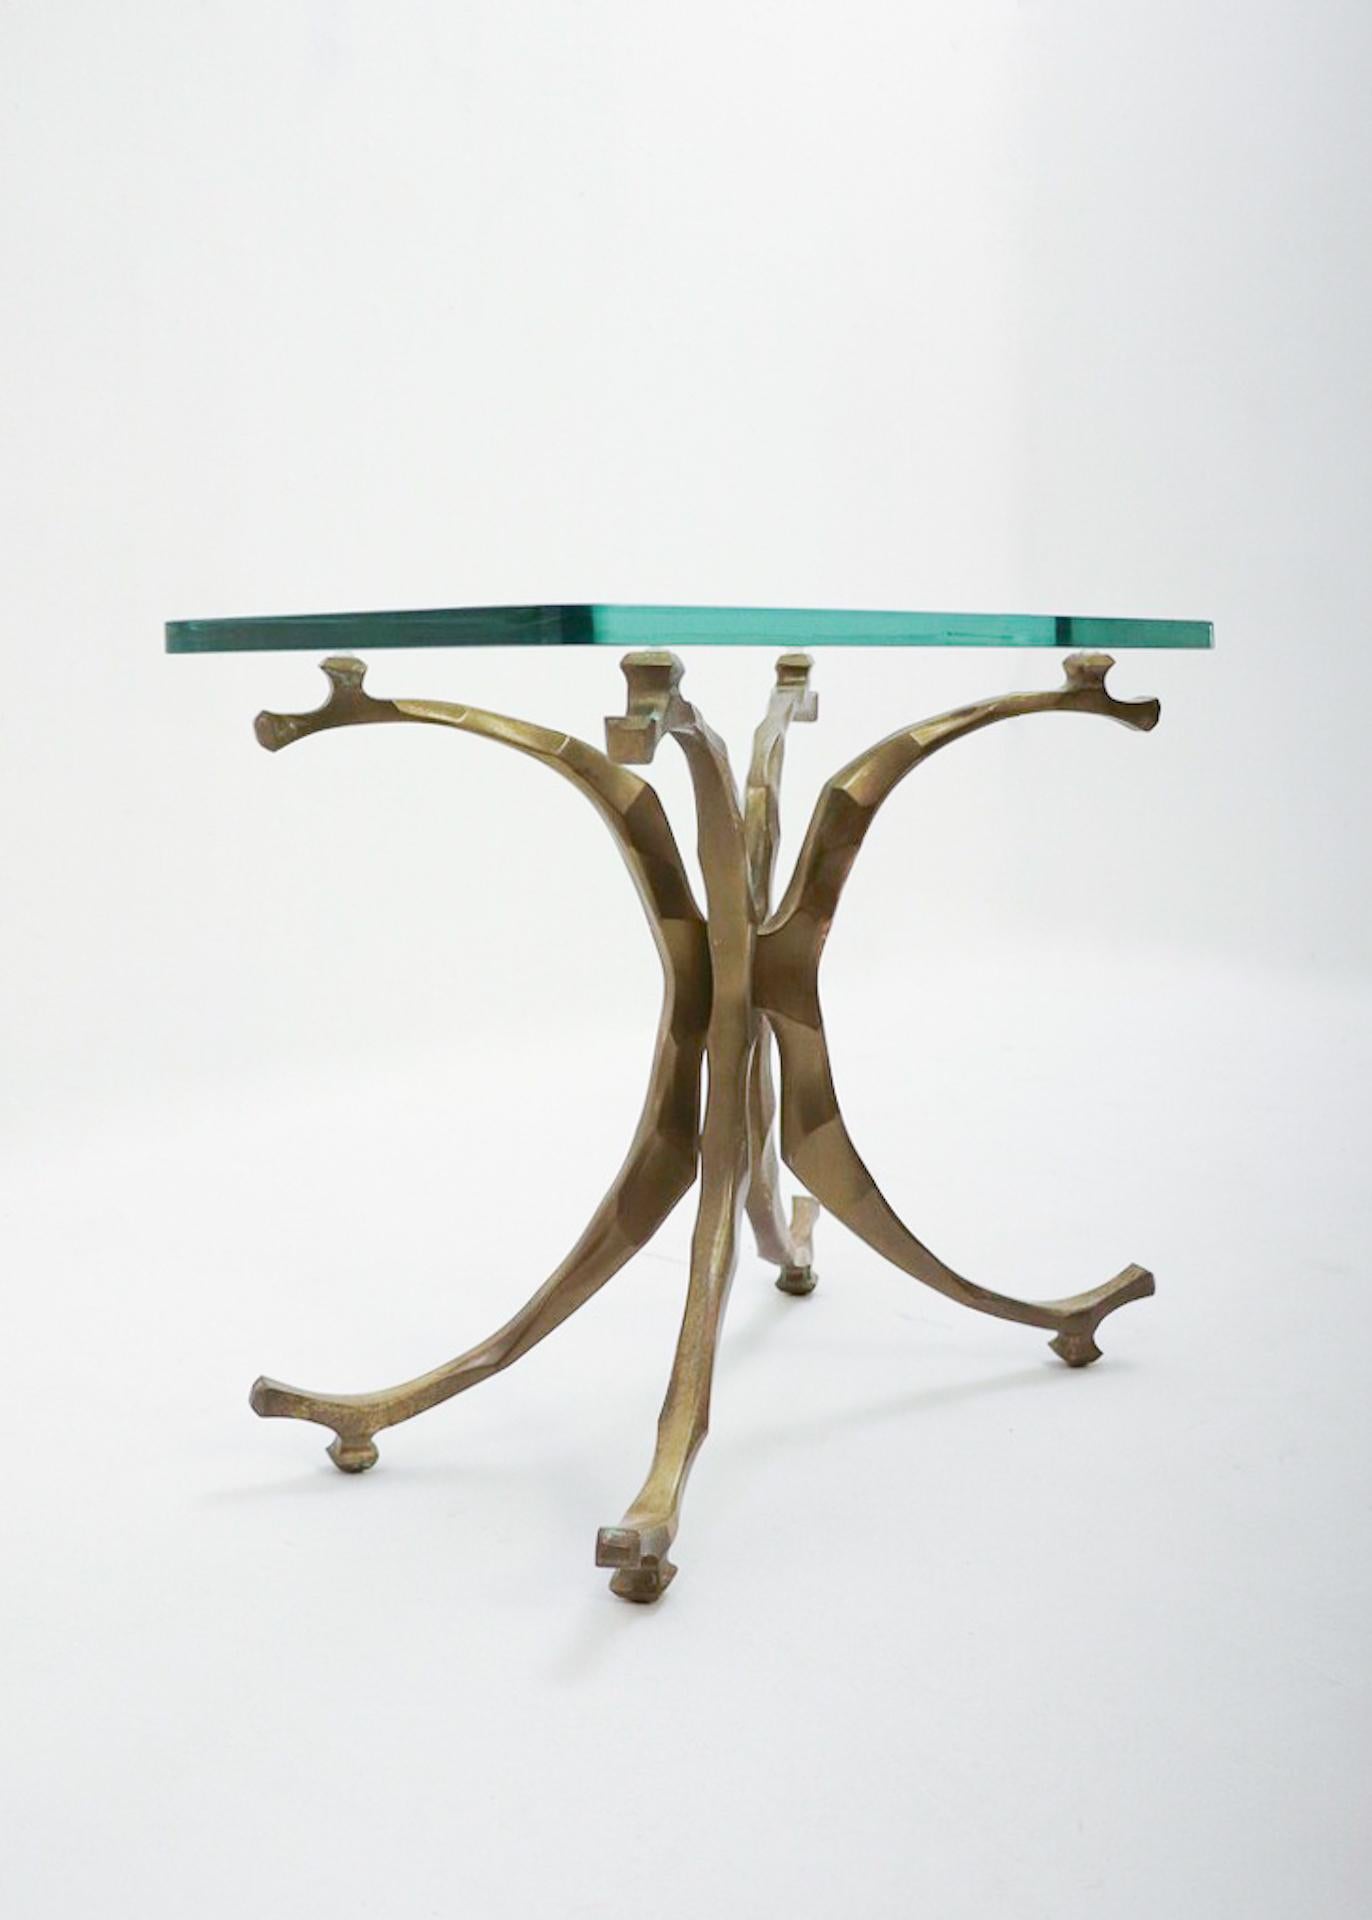 Late 20th Century Mid-Century Modern Bronze 'Seahorse' Coffee Tables by Willo Daro, 1970s For Sale